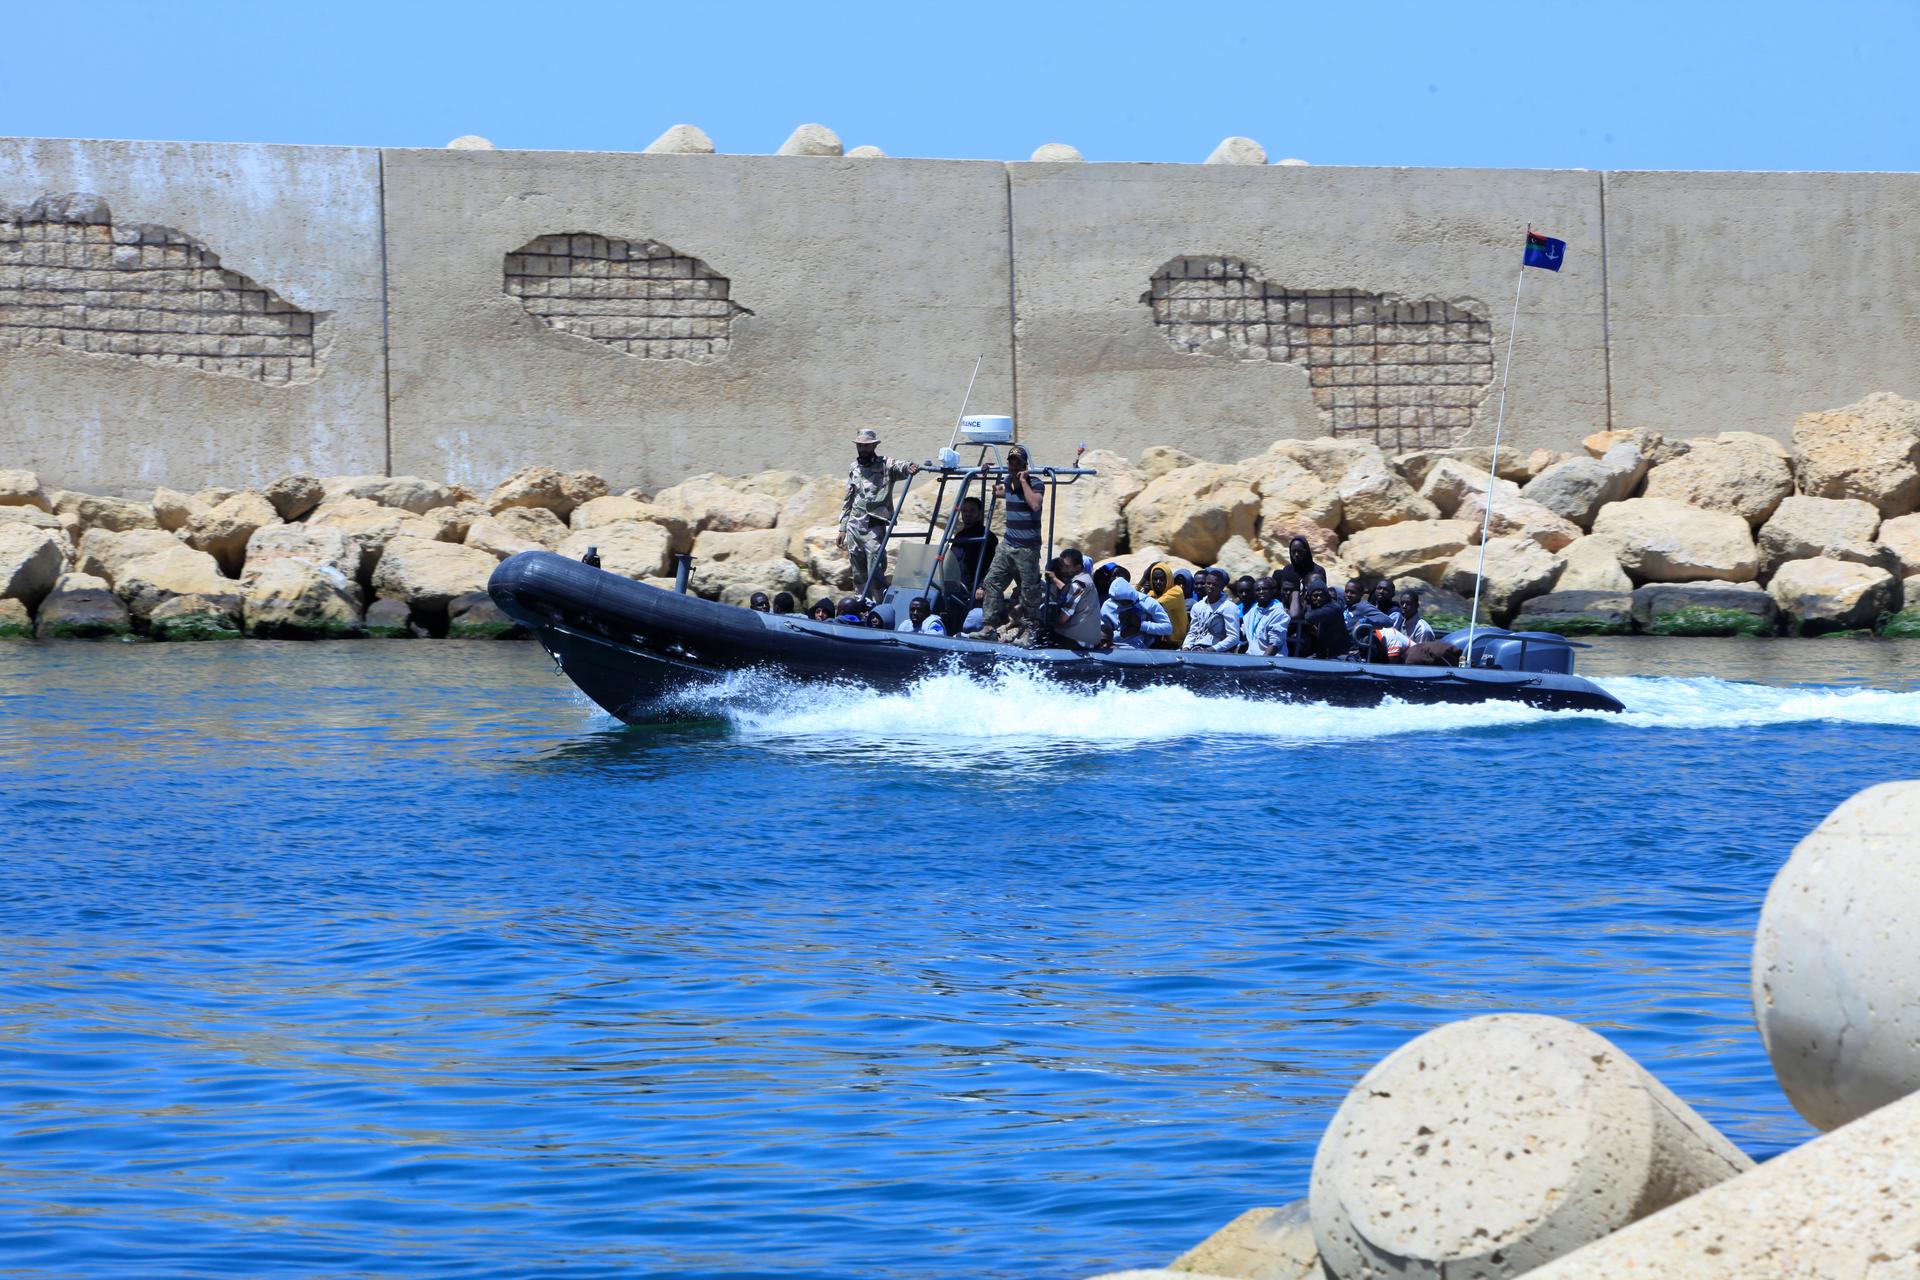 A Libyan Navy boat transports migrants who attempted to flee to Europe back to the coastal city of Tripoli